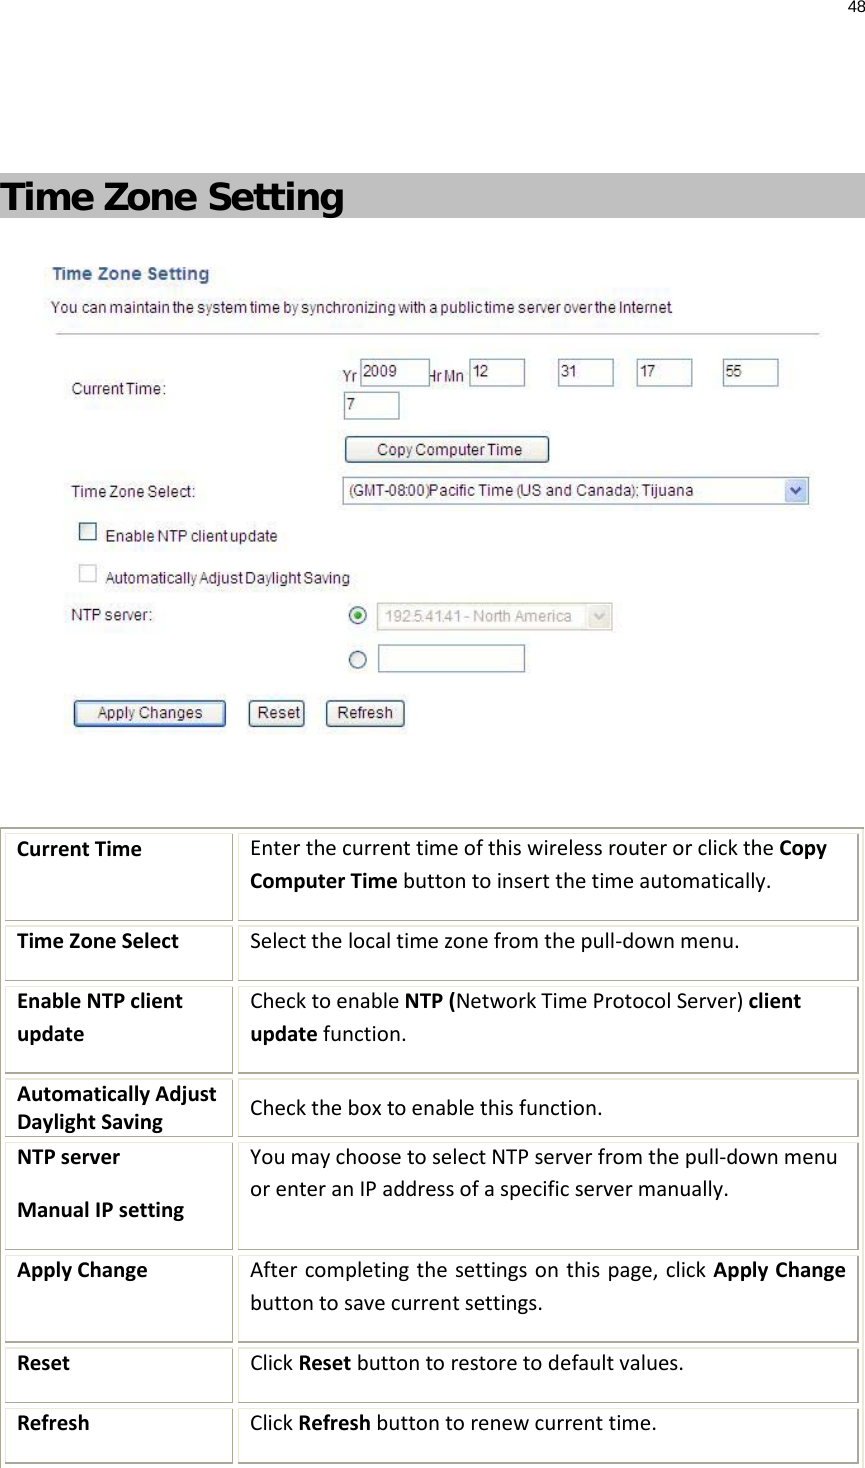 48    Time Zone Setting   Current Time Enter the current time of this wireless router or click the Copy Computer Time button to insert the time automatically. Time Zone Select Select the local time zone from the pull-down menu. Enable NTP client update Check to enable NTP (Network Time Protocol Server) client update function.  Automatically Adjust Daylight Saving Check the box to enable this function. NTP server Manual IP setting You may choose to select NTP server from the pull-down menu or enter an IP address of a specific server manually. Apply Change After completing the settings on this page, click Apply Change button to save current settings. Reset Click Reset button to restore to default values. Refresh Click Refresh button to renew current time.  